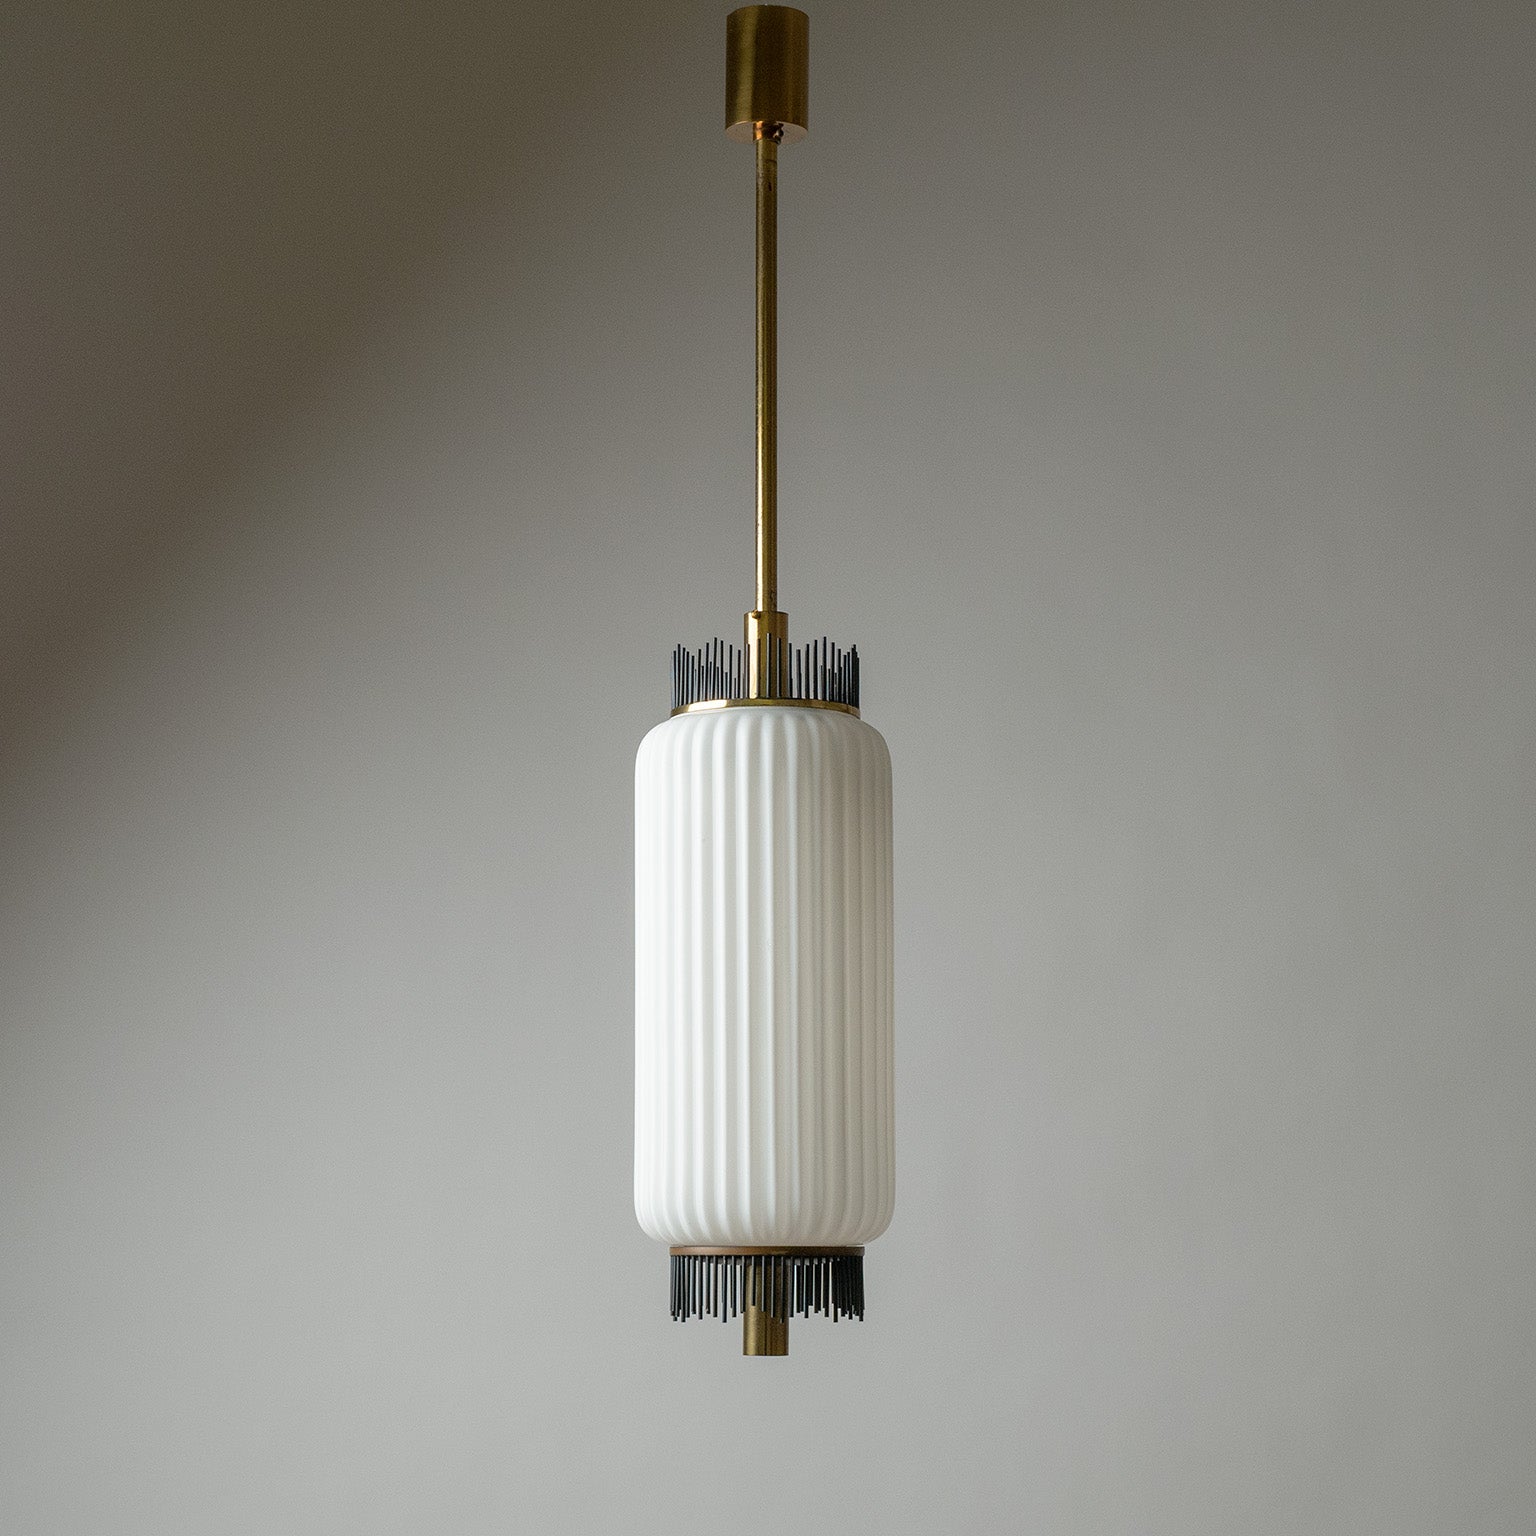 Rare modernist Italian pendant or ceiling light from the 1950s. Composed of a large ribbed satin glass diffuser and brass hardware with graphical black lacquered brass finials on both ends of the glass. Very nice original condition with some patina